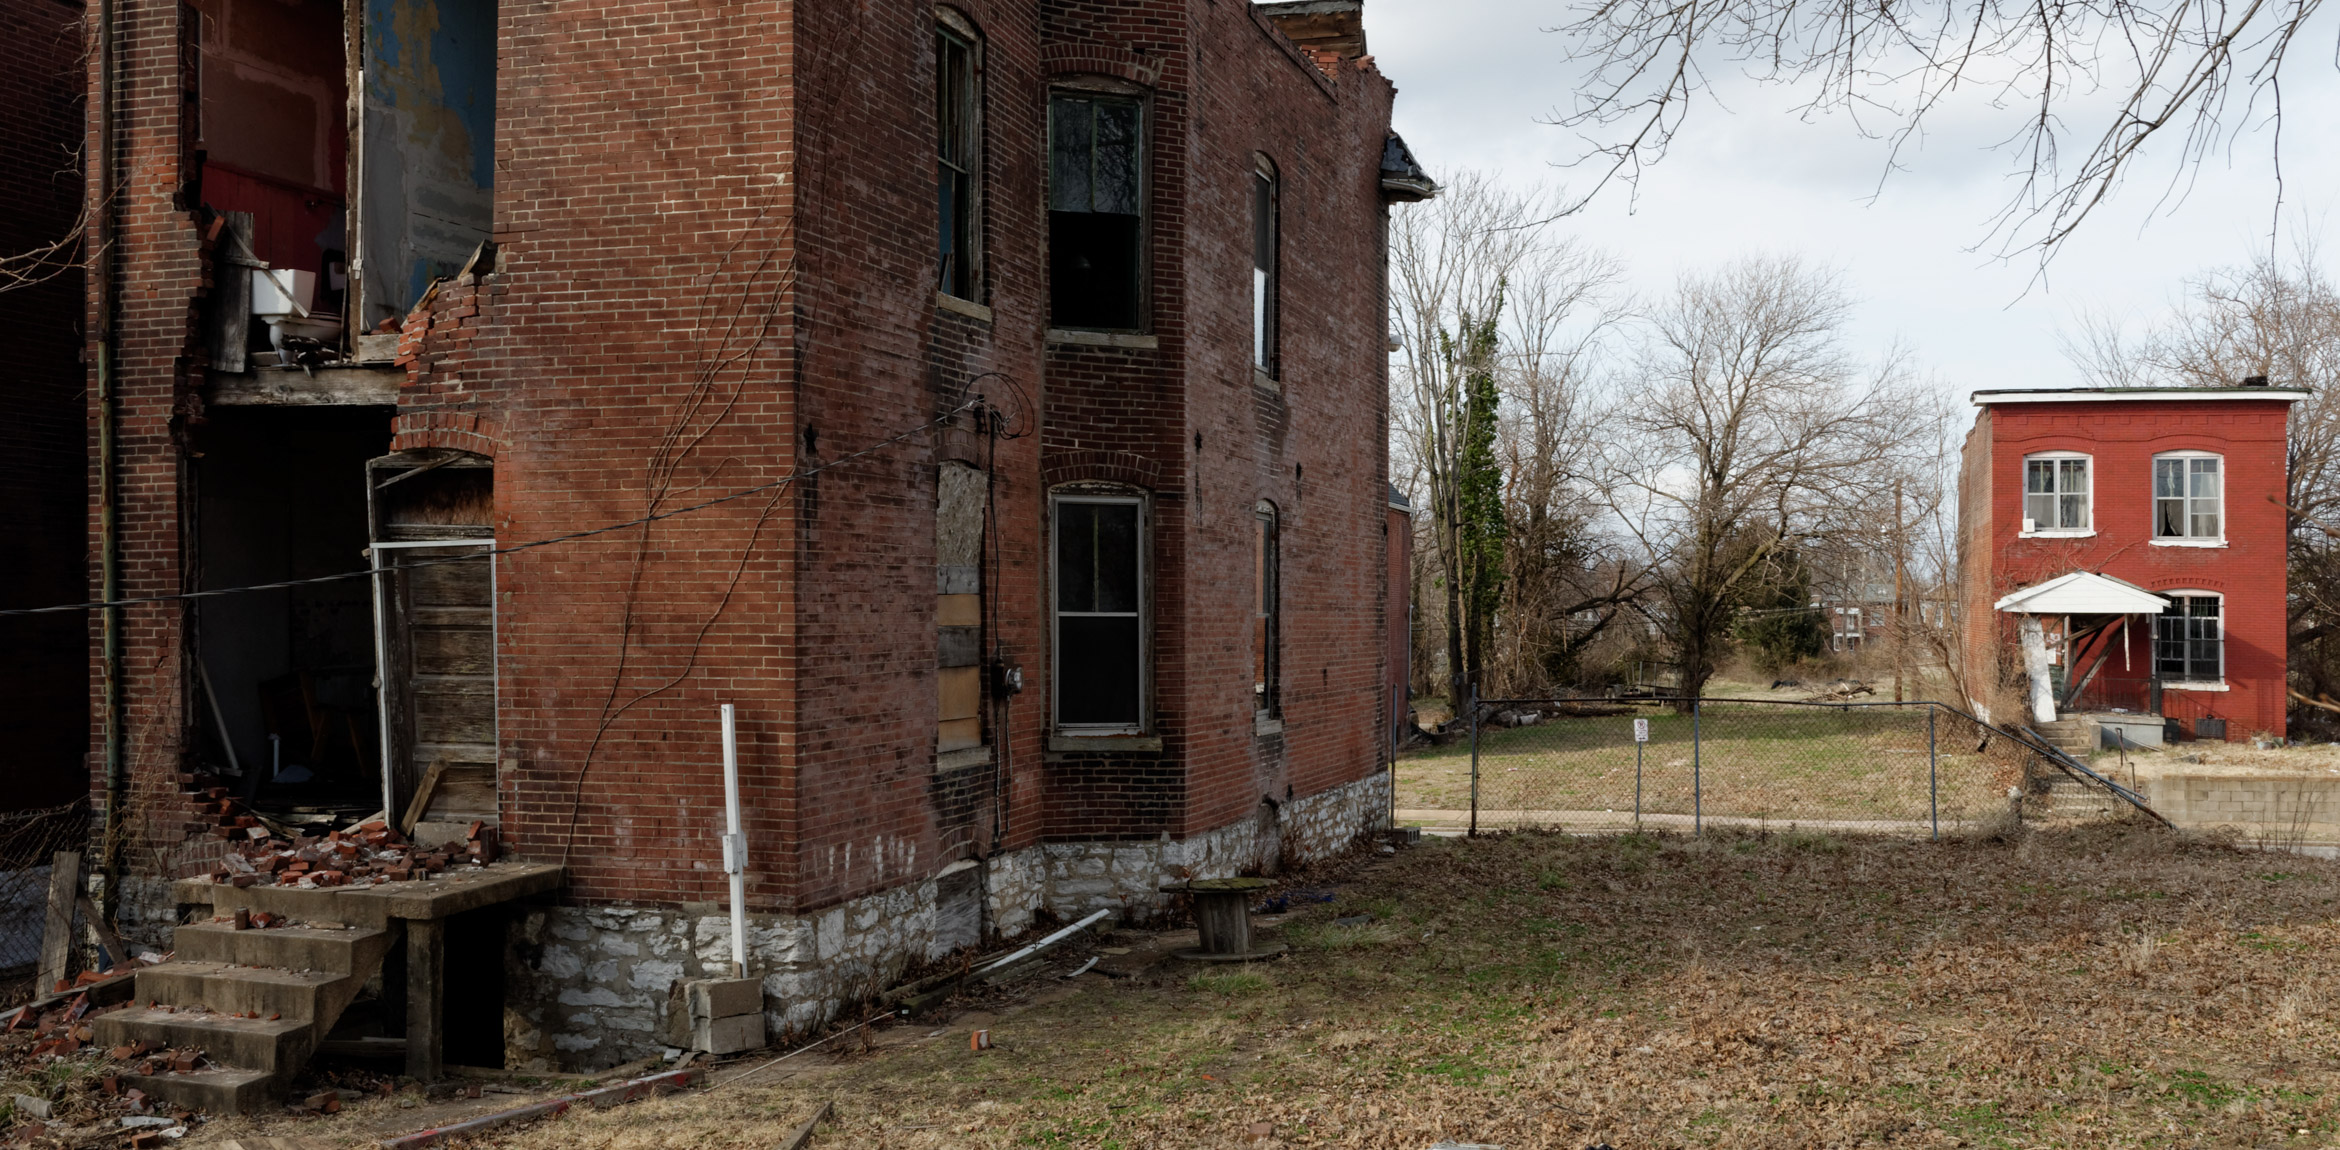 A rear view of the gutted out 4562 Enright Avenue, a brick townhouse in a St. Louis neighborhood.